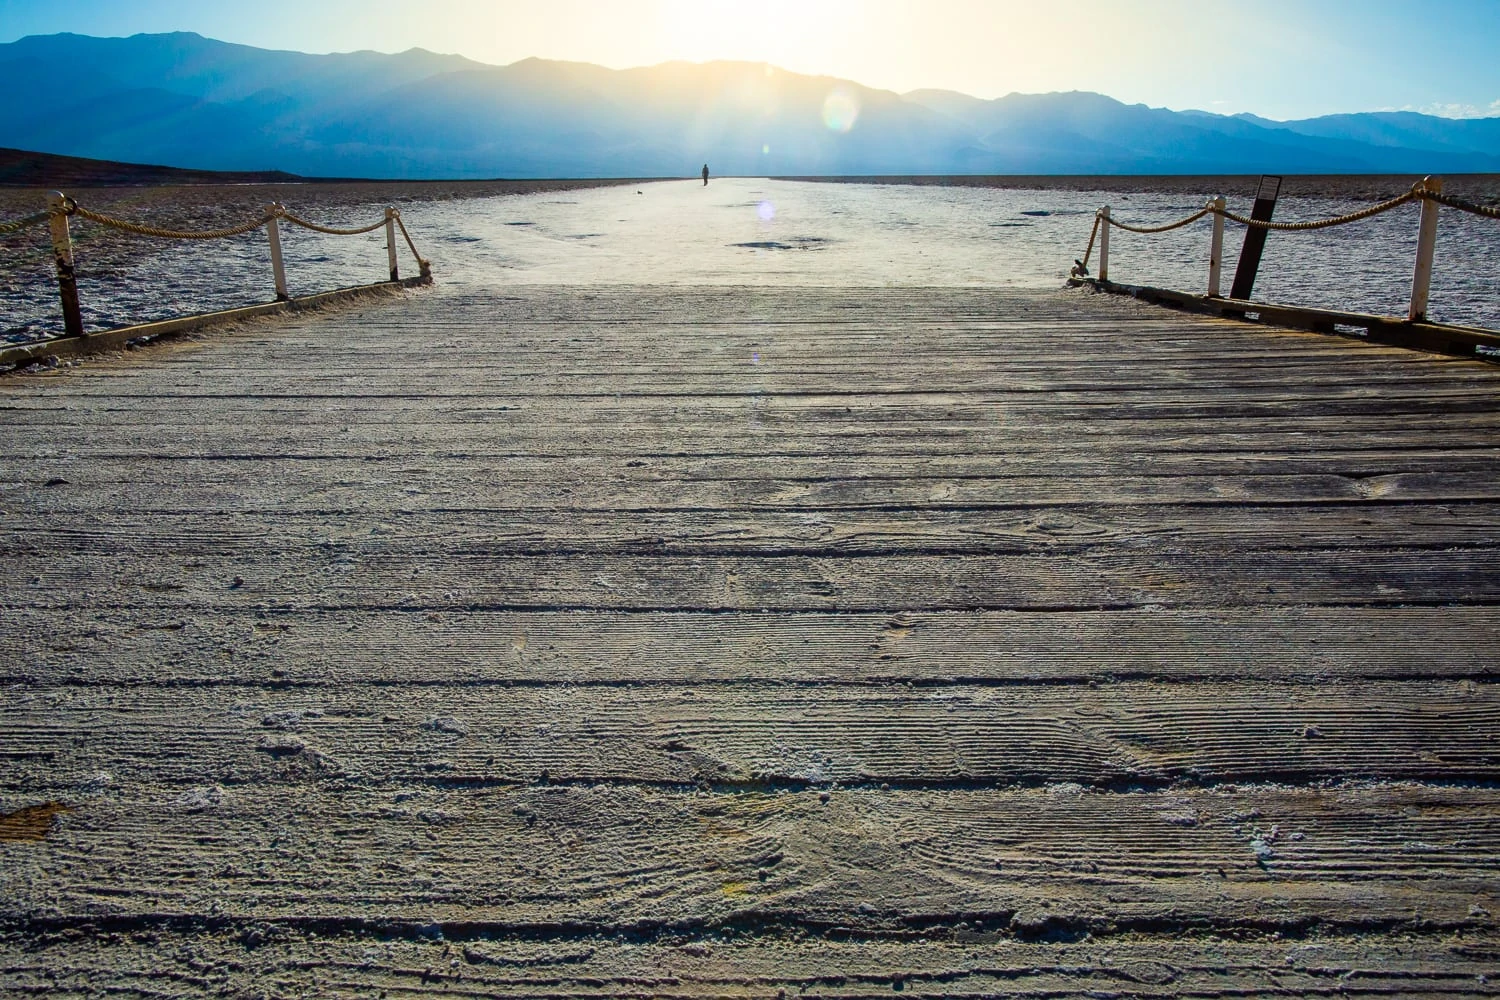 The end of a boardwalk gives way to the saltwater flats at Badwater basin.